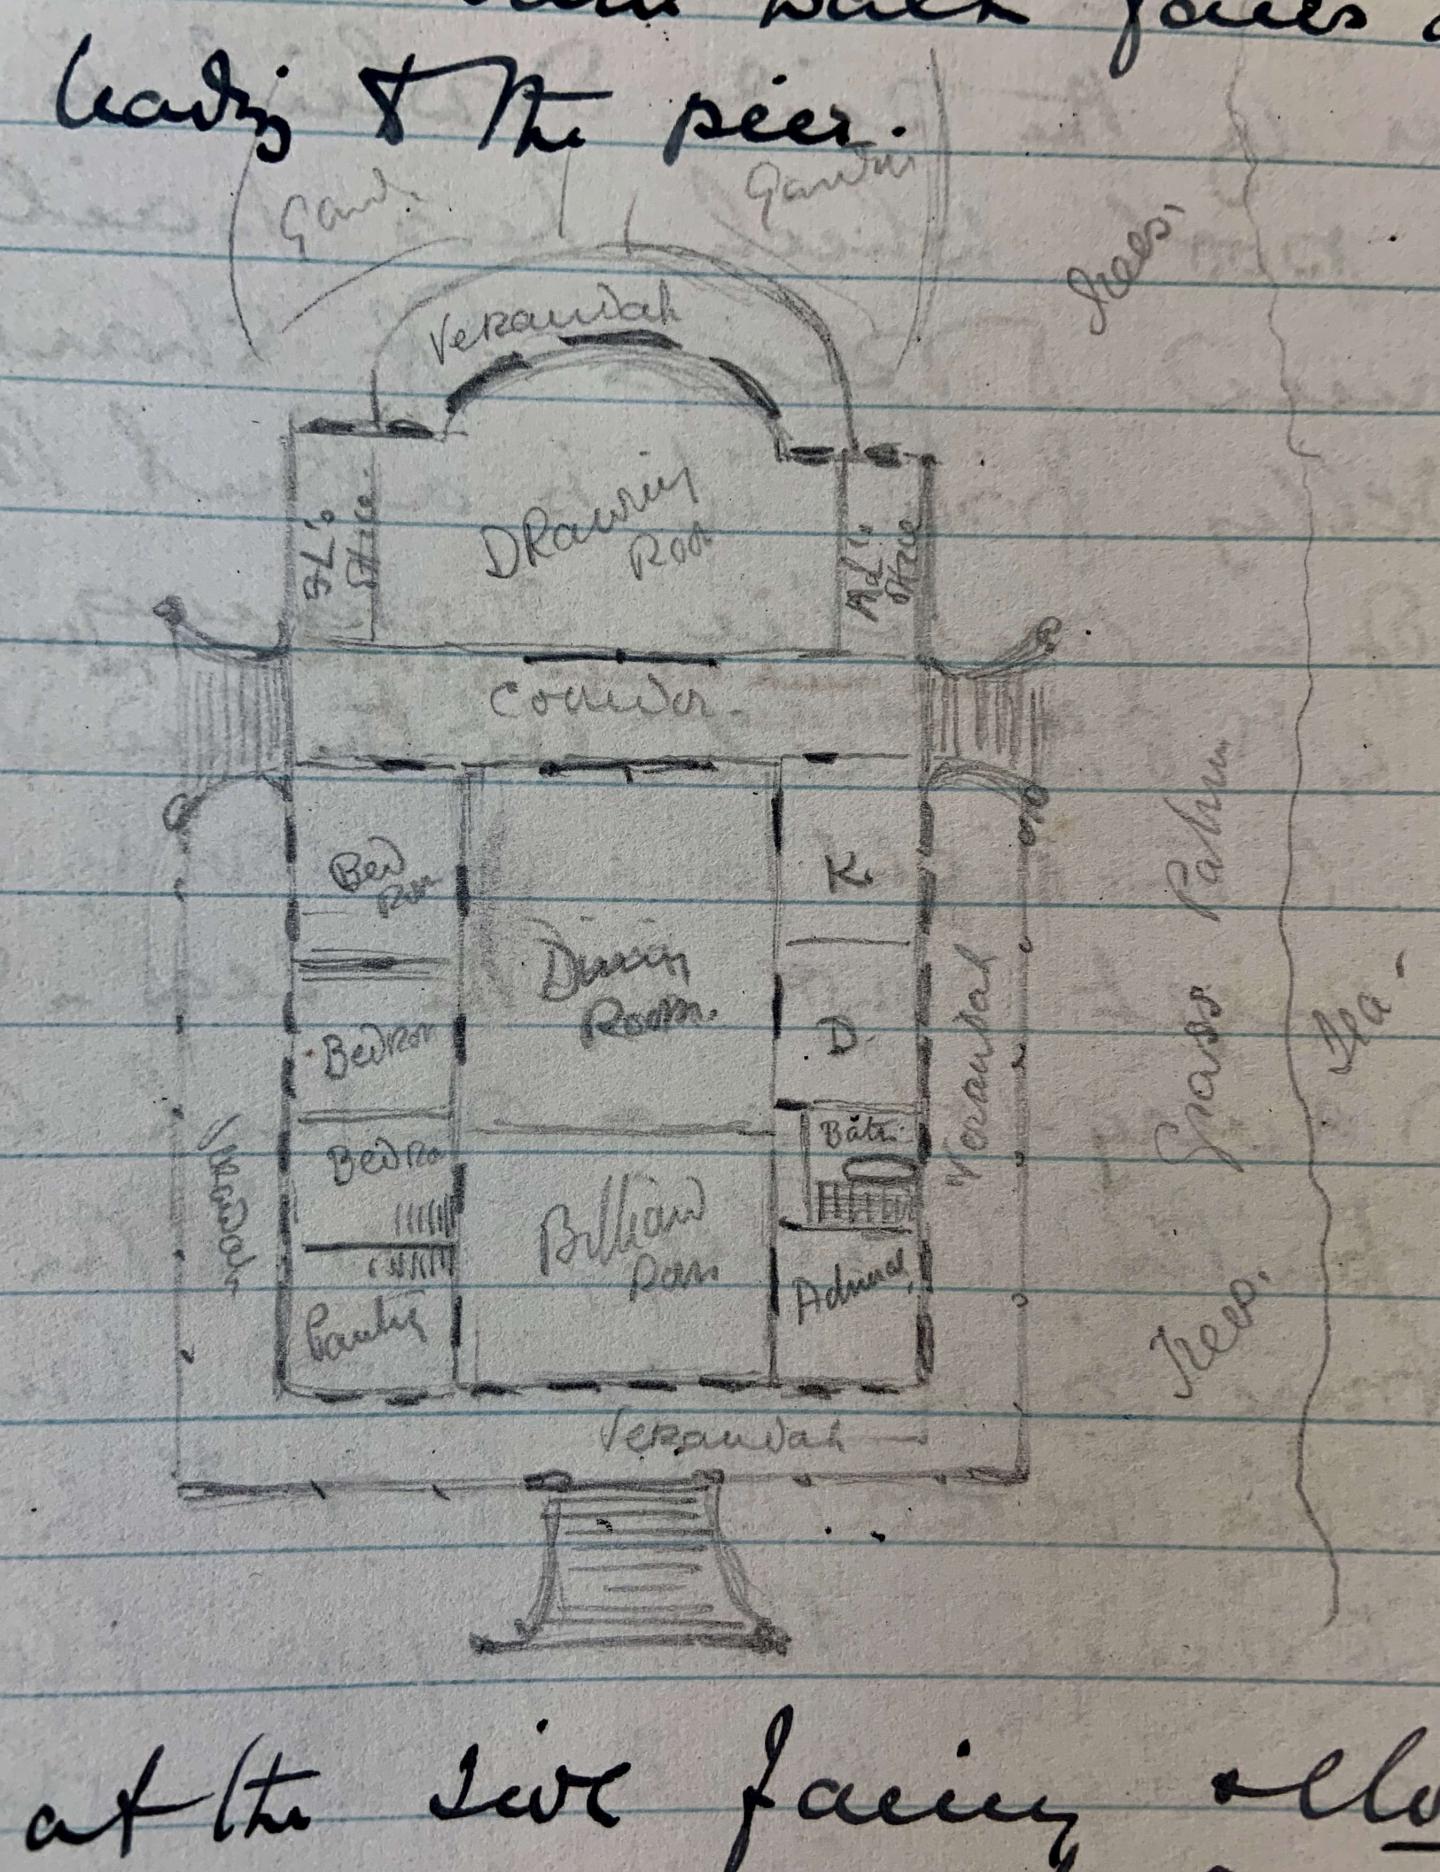 The floor plan of Admiralty House, sketched by Lady Fullerton in her diary 